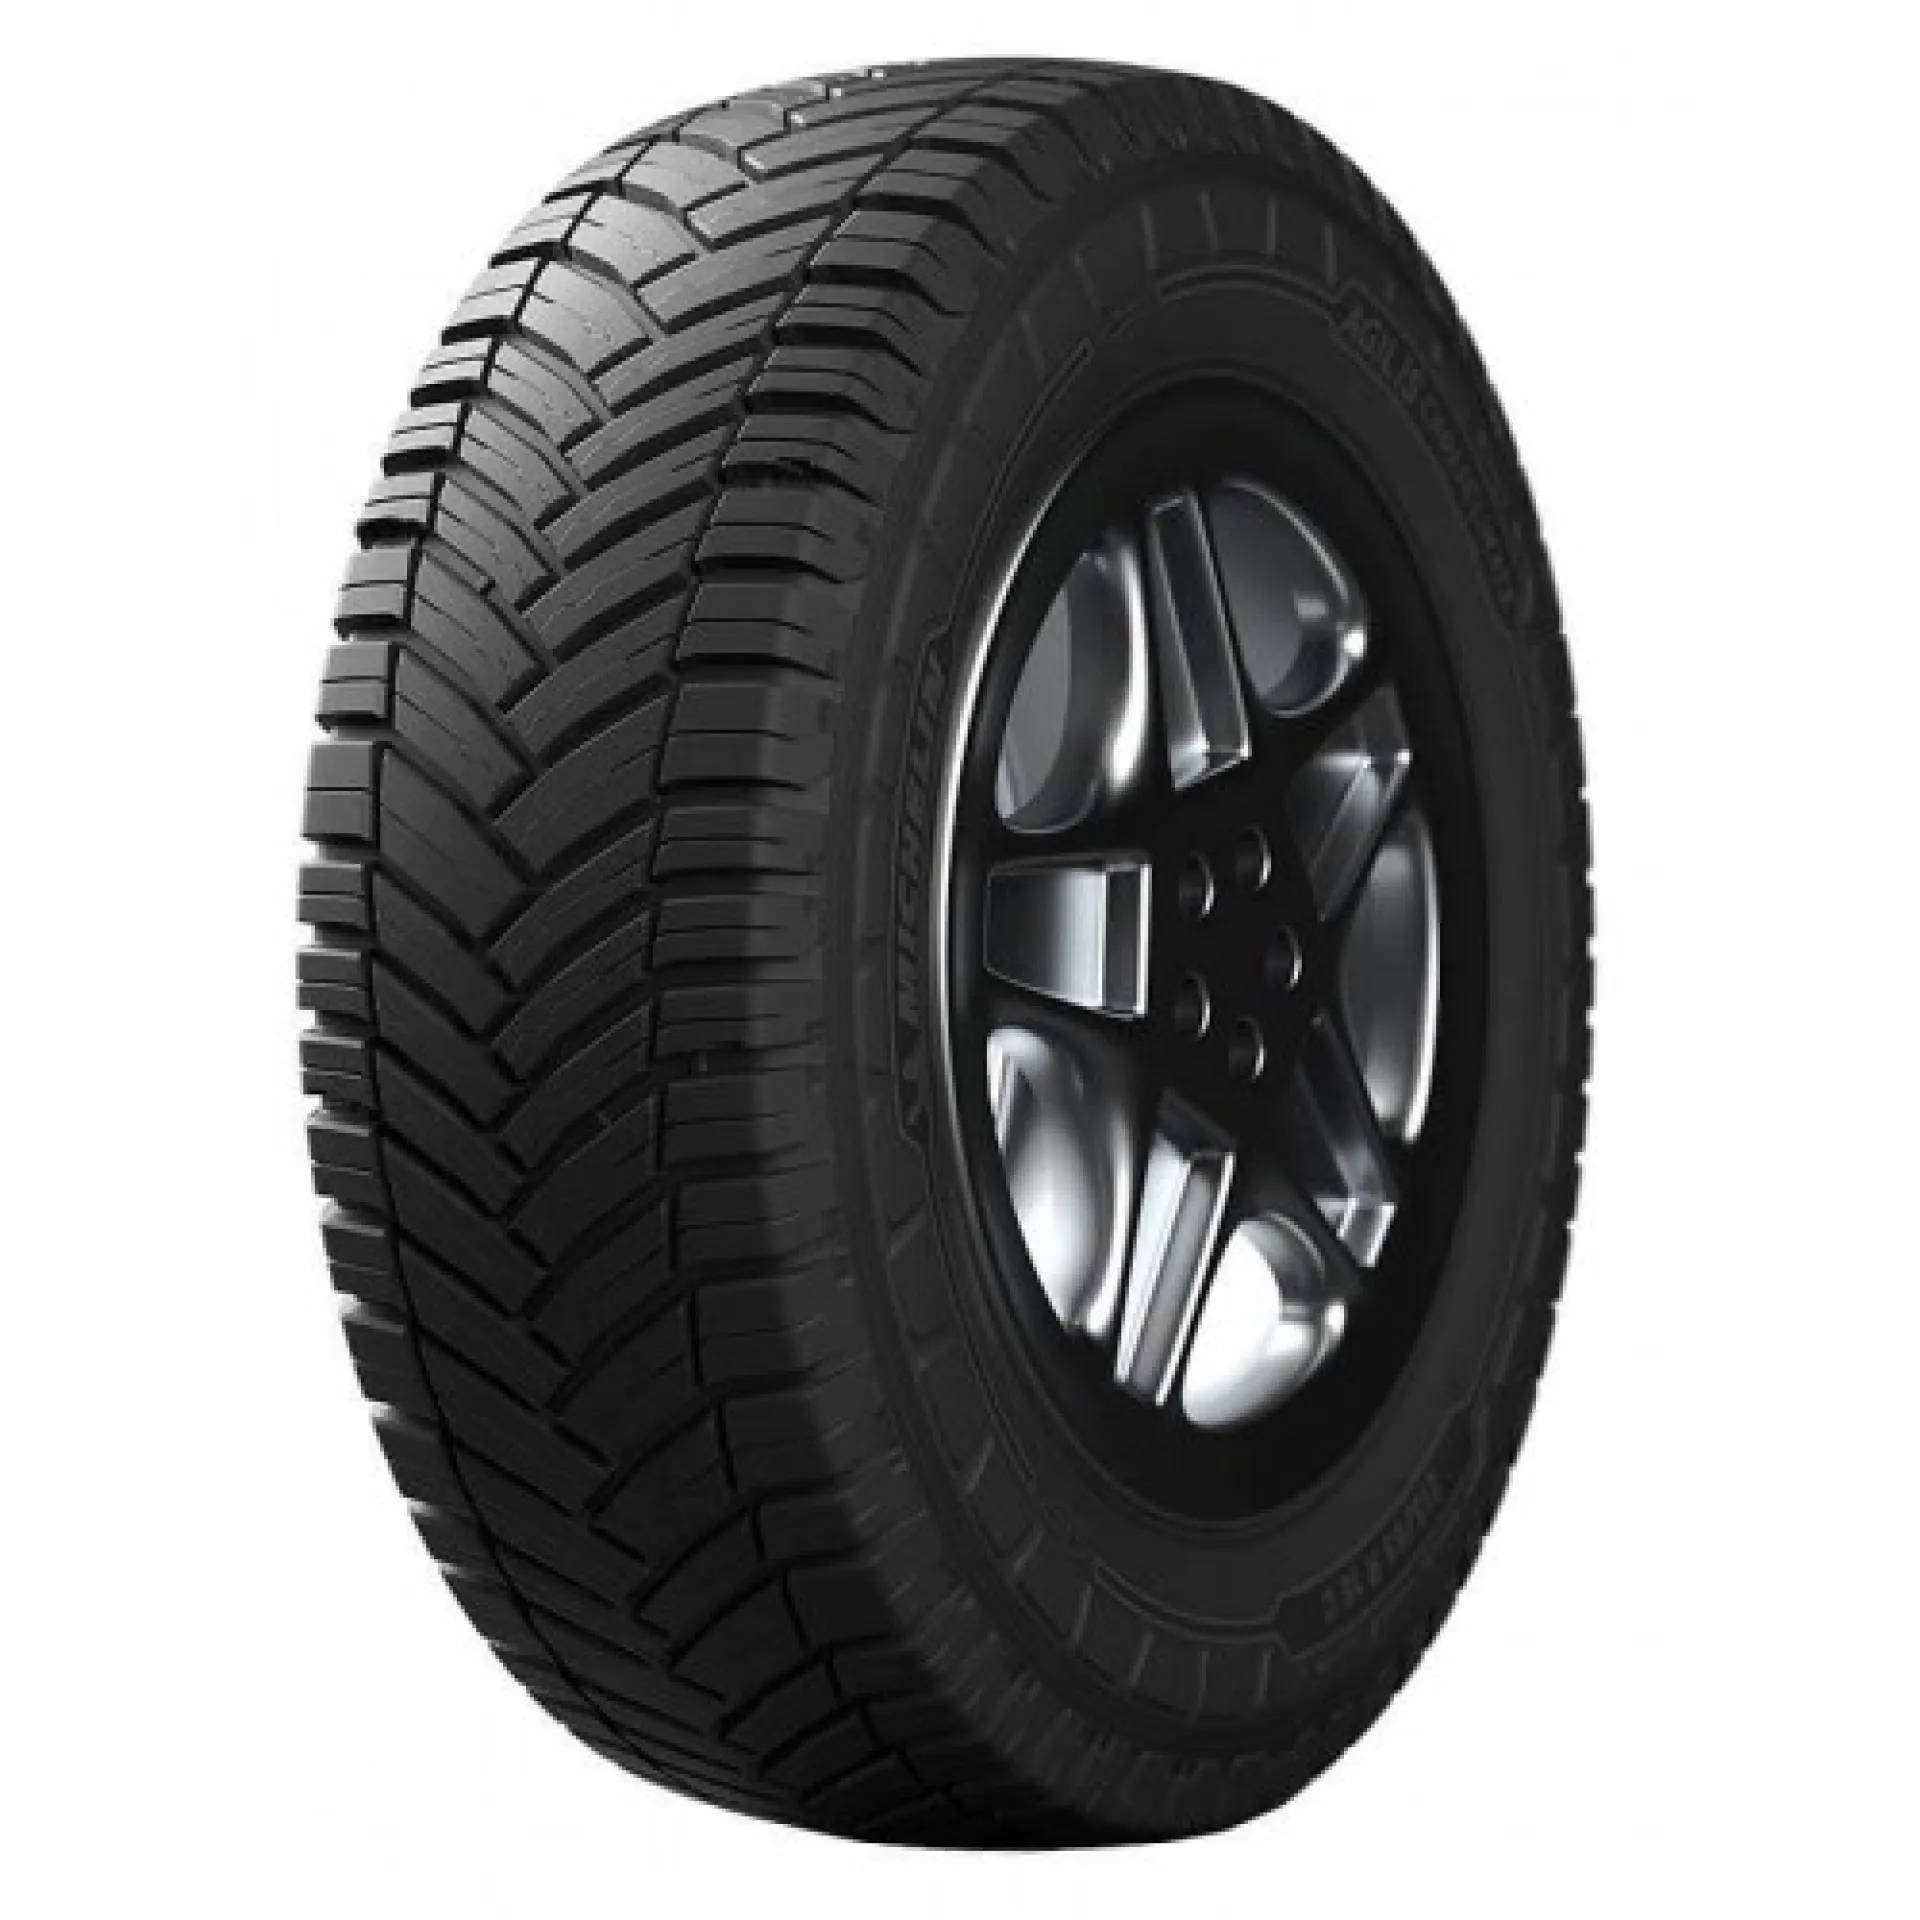 Tyre Michelin CrossClimate - Agilis Tests Reviews and